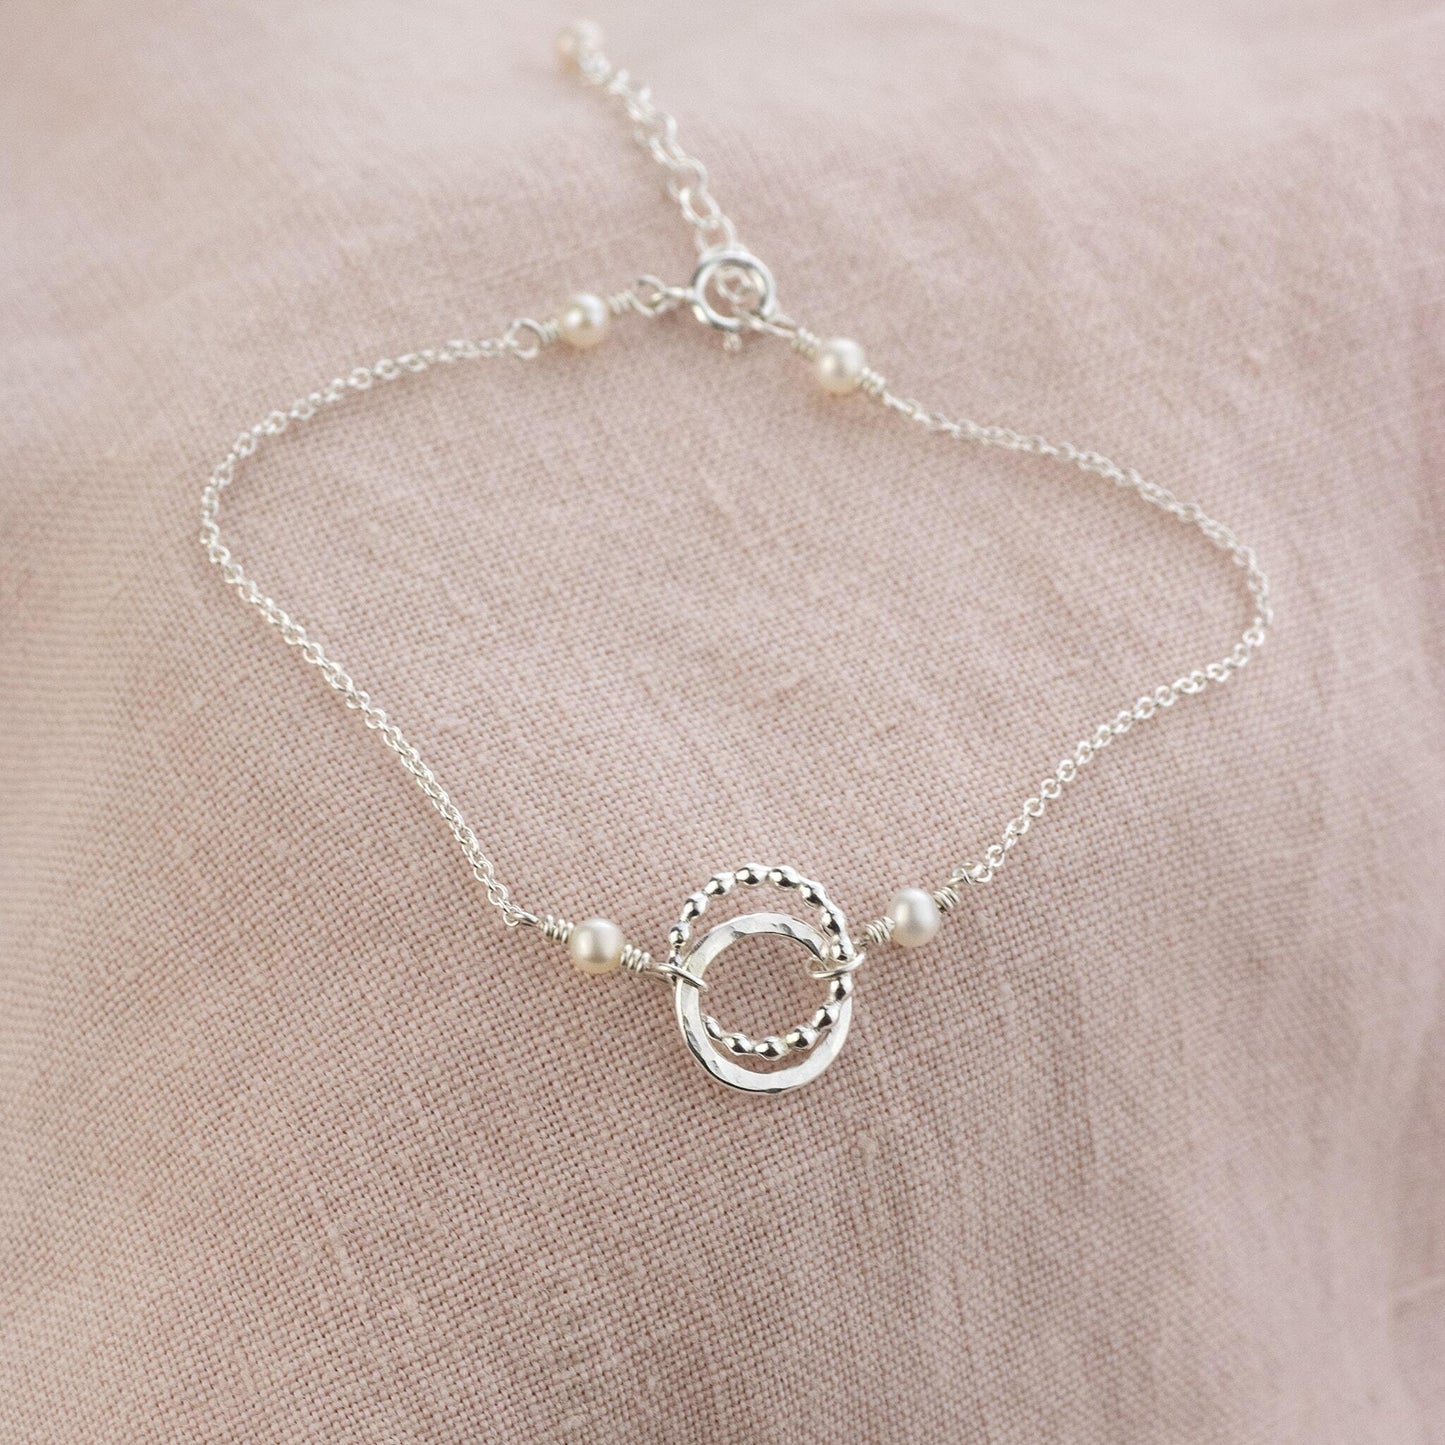 Silver Pearl Love Knot Bracelet - Linked for a Lifetime